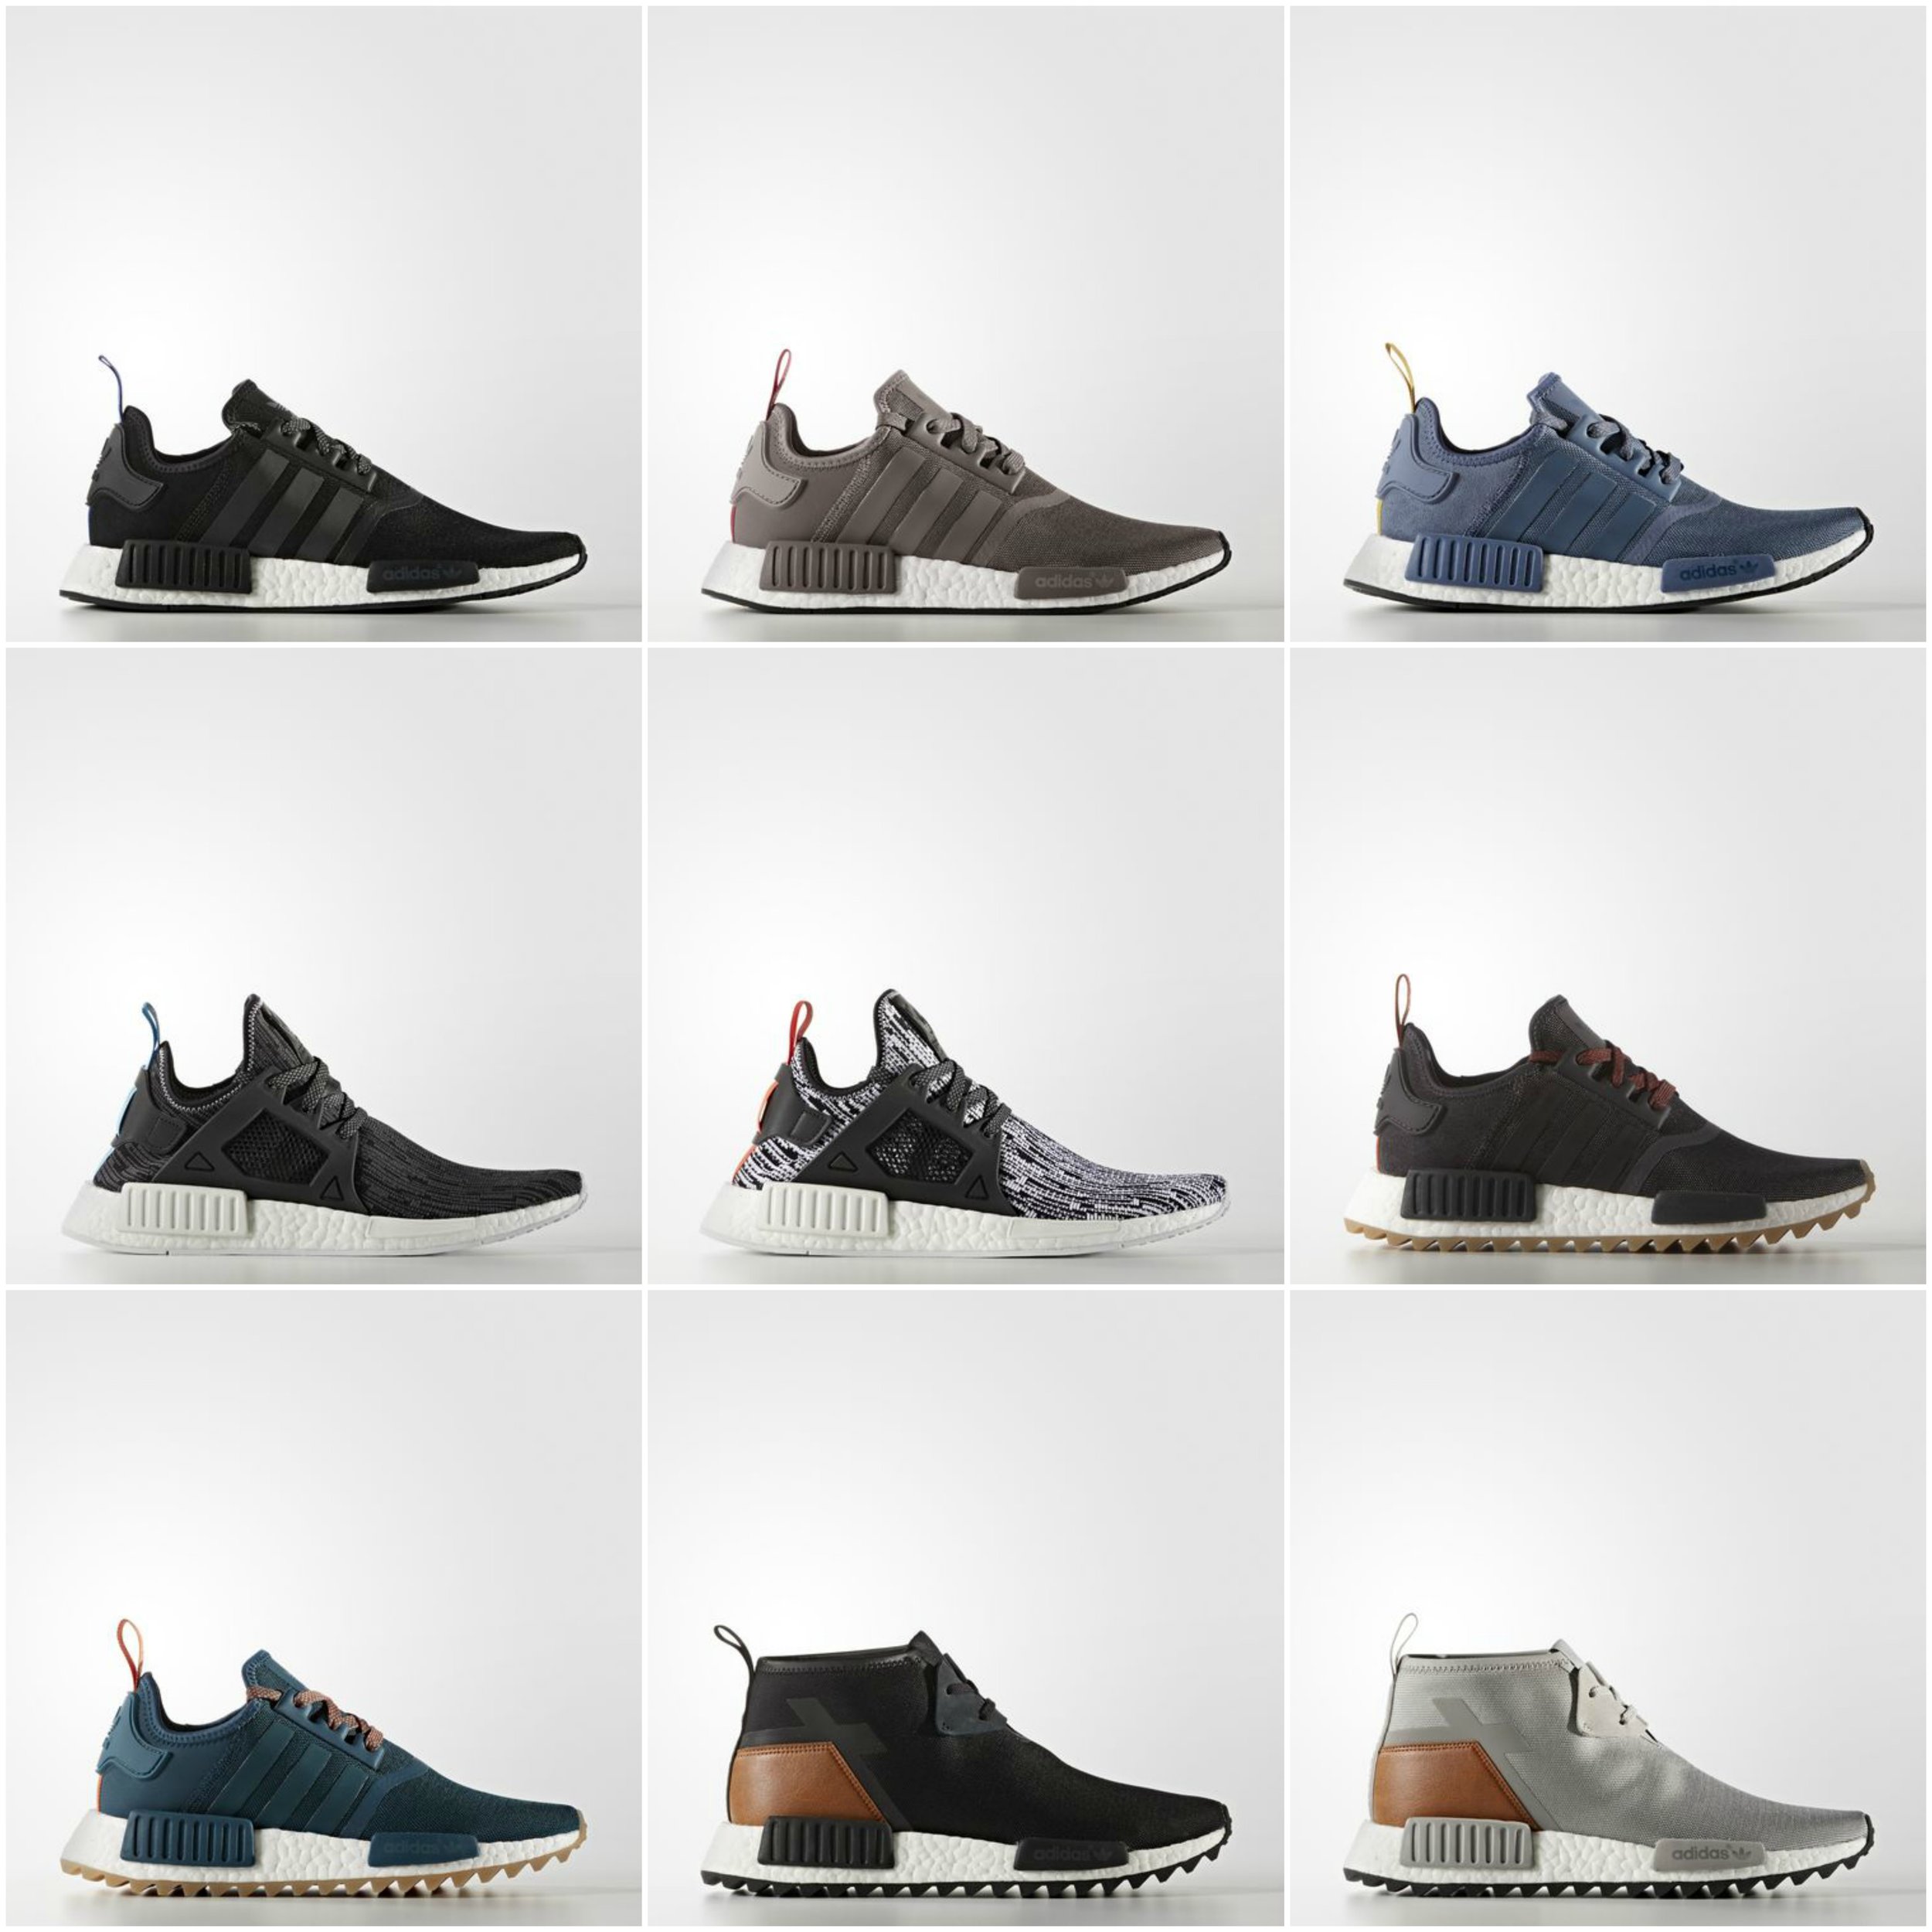 all adidas nmd colorways